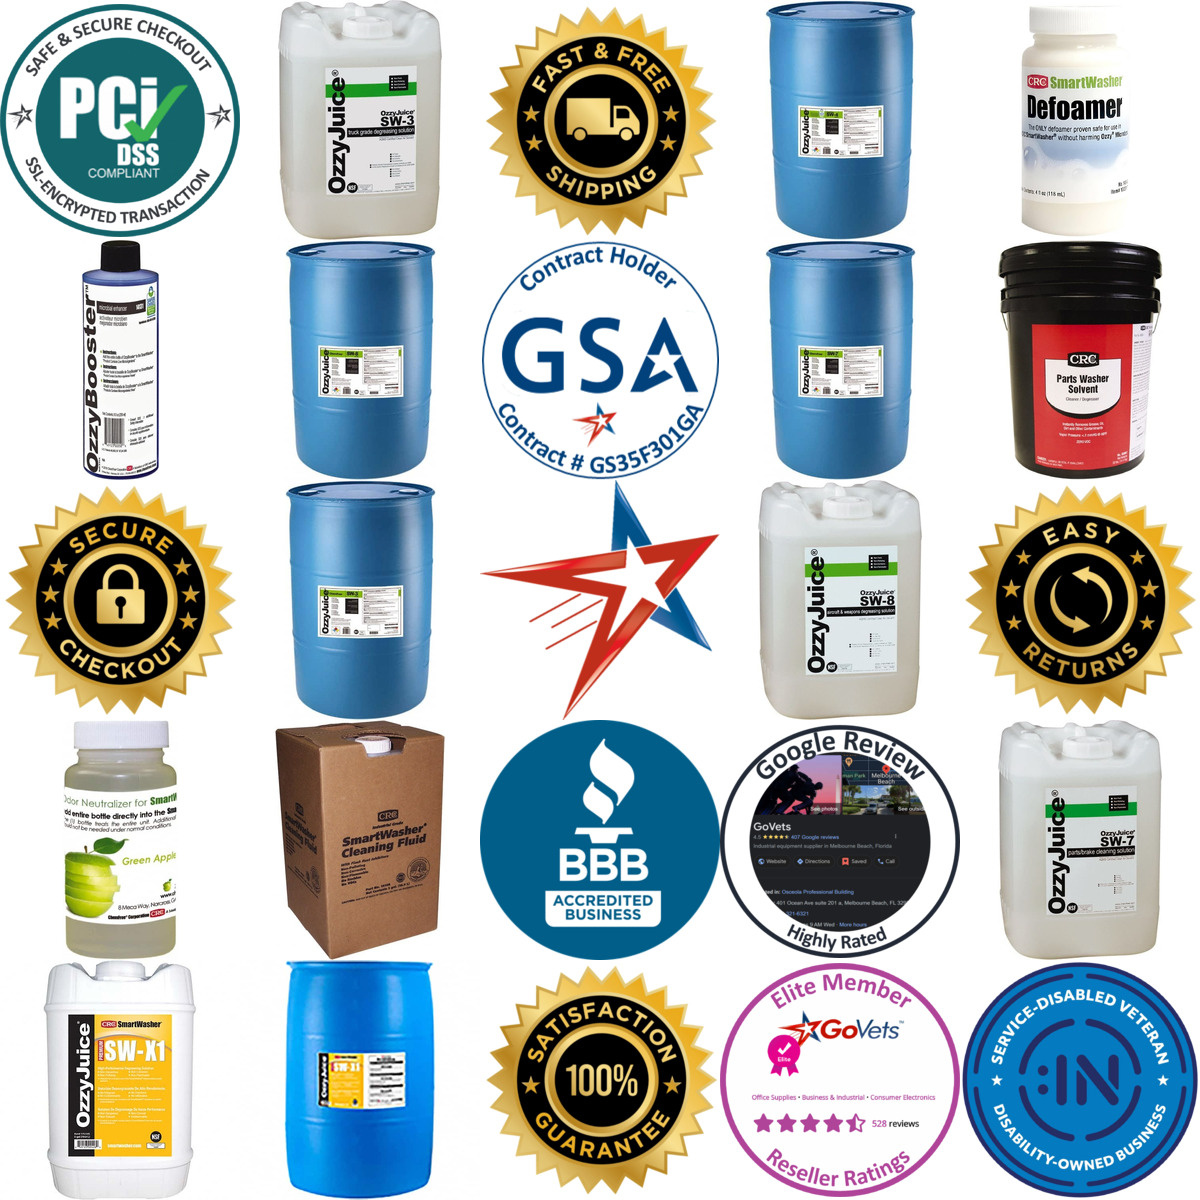 A selection of Crc products on GoVets